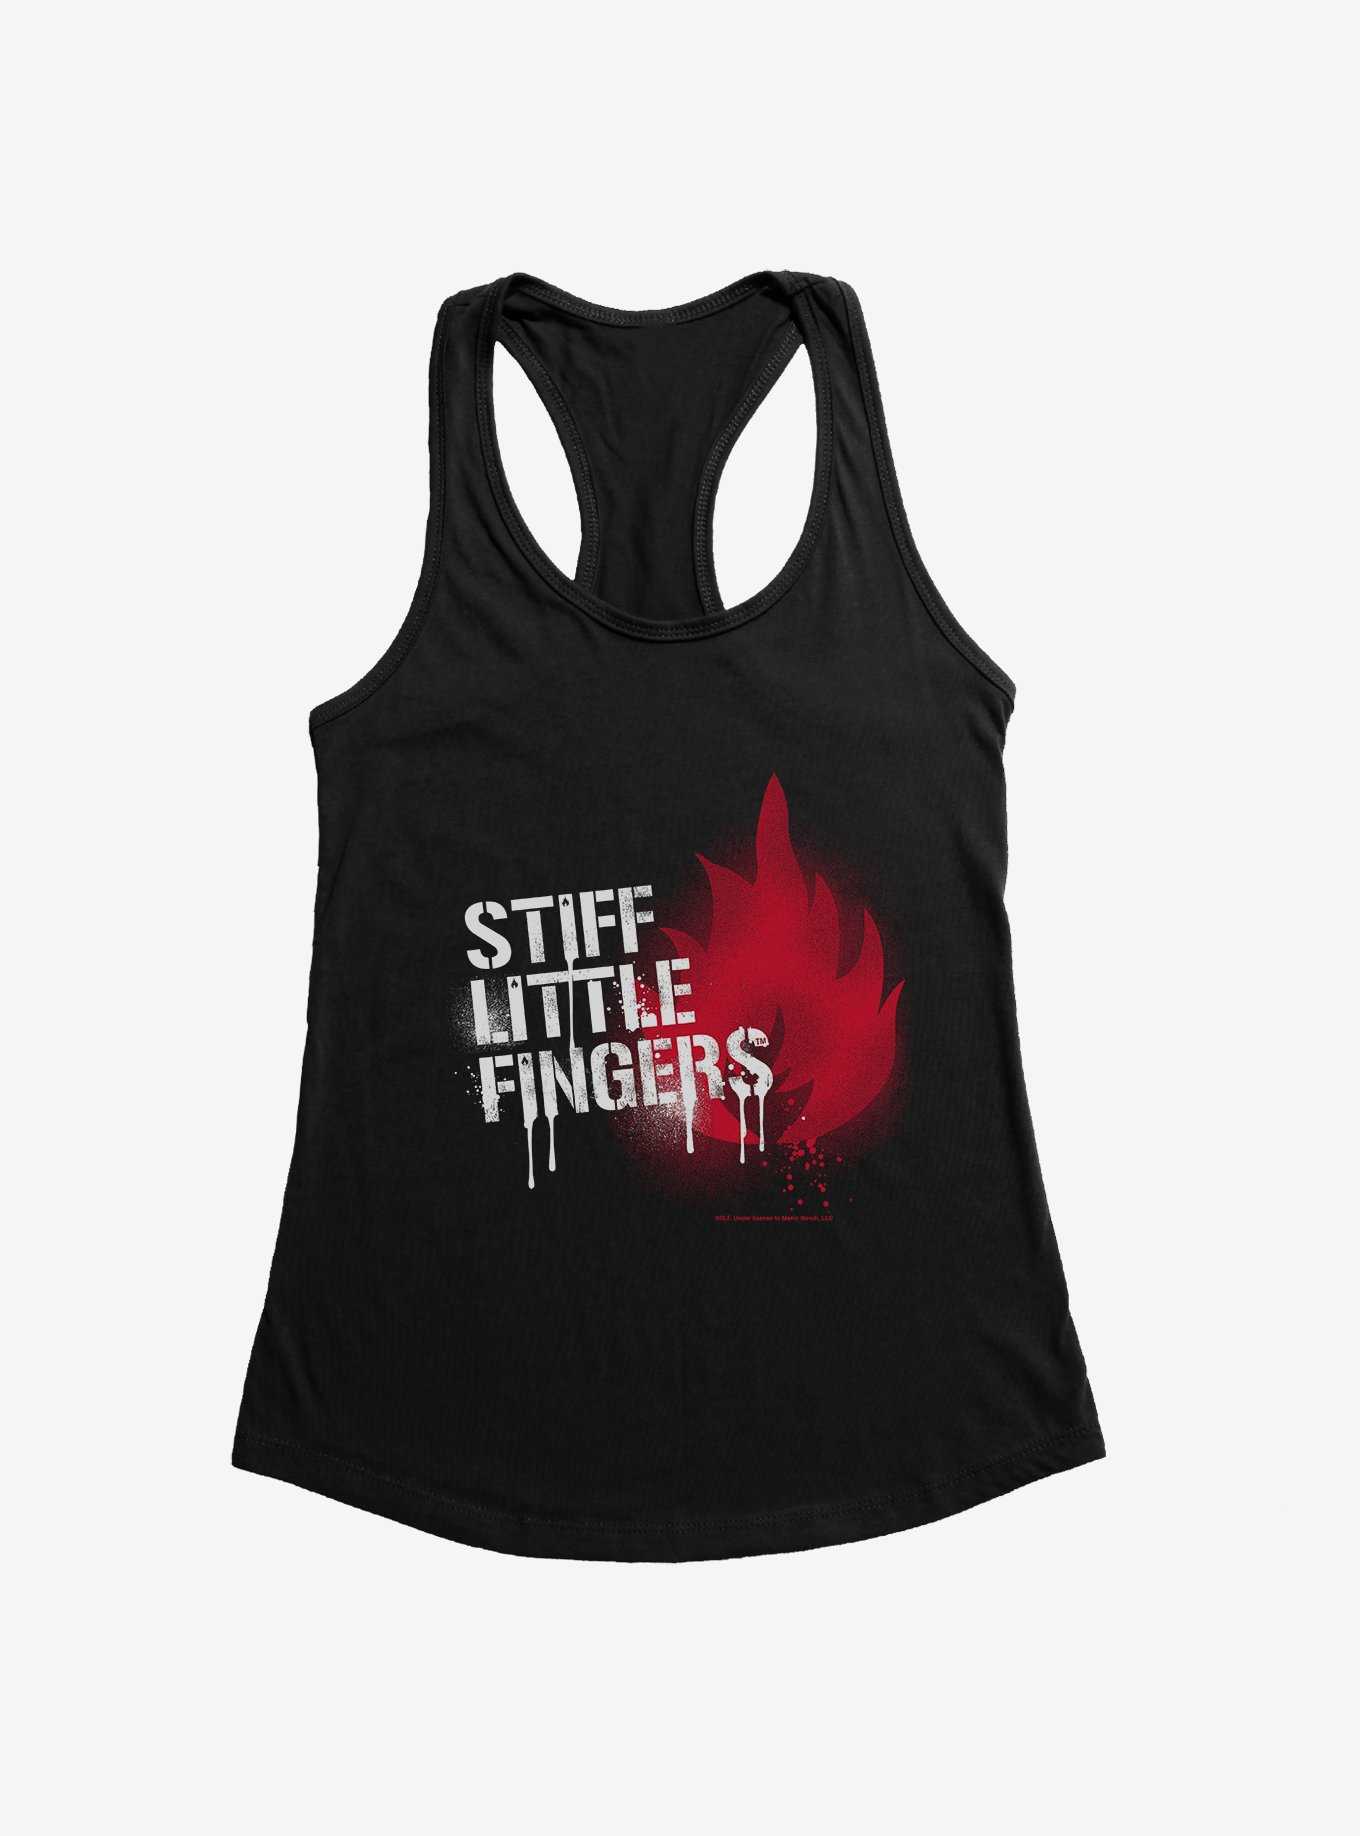 Stiff Little Fingers Inflammable Material Girls Tank, , hi-res